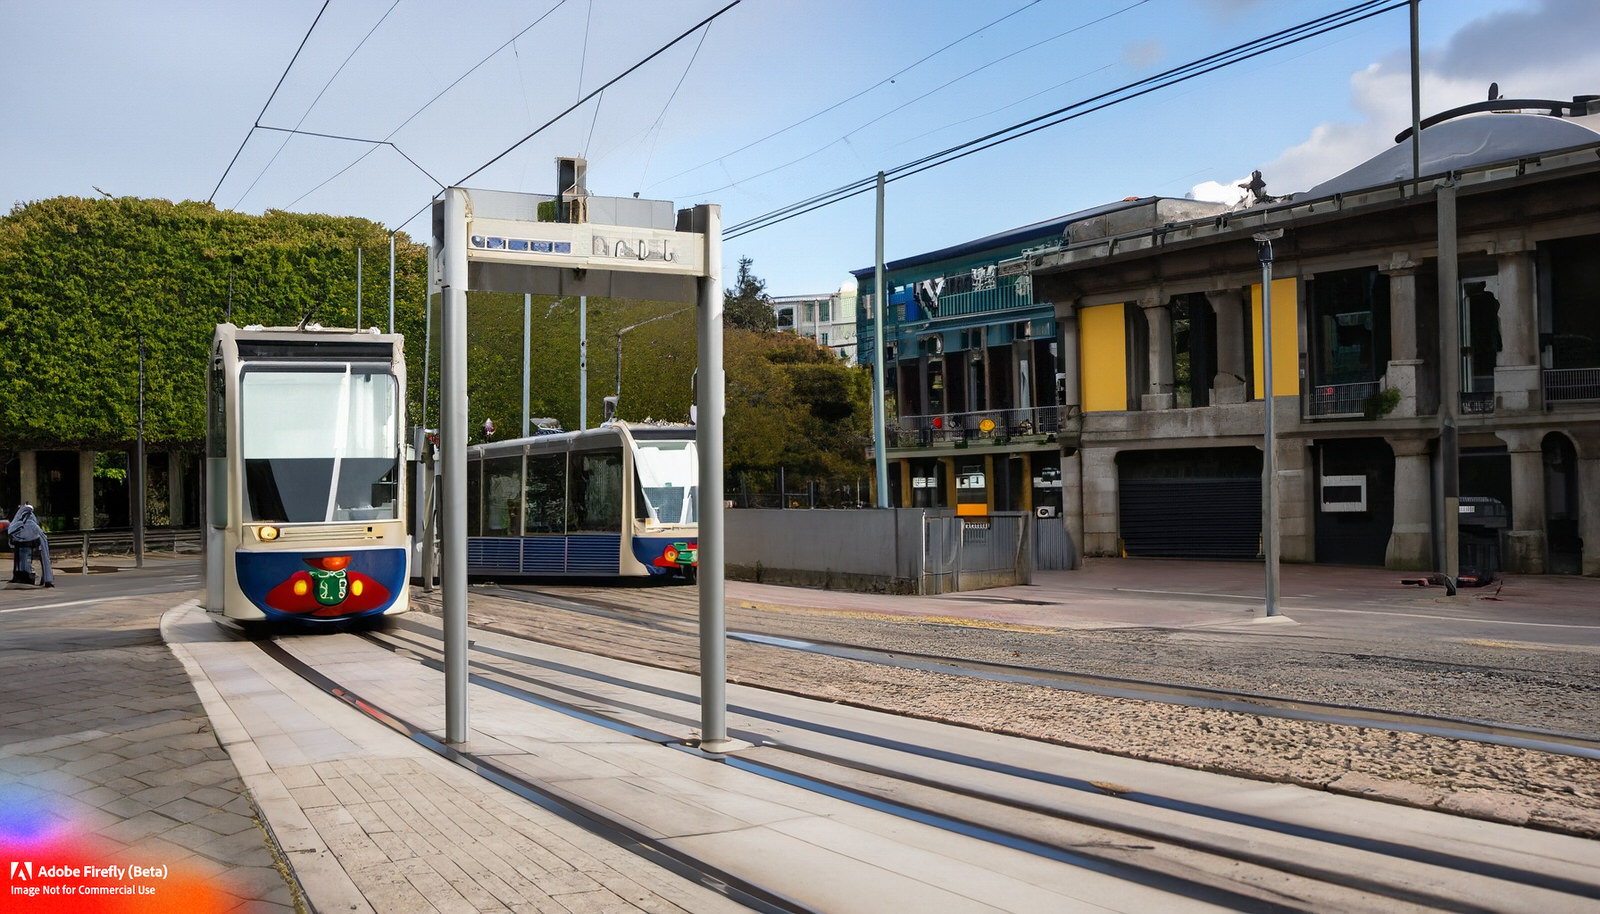 ADOBE FIREFLY EXAMPLE NOT FOR COMMERCIAL USE - THE LUAS TRAM STOP AT WINDY ARBOUR AND THE IMMEDIATE AREA